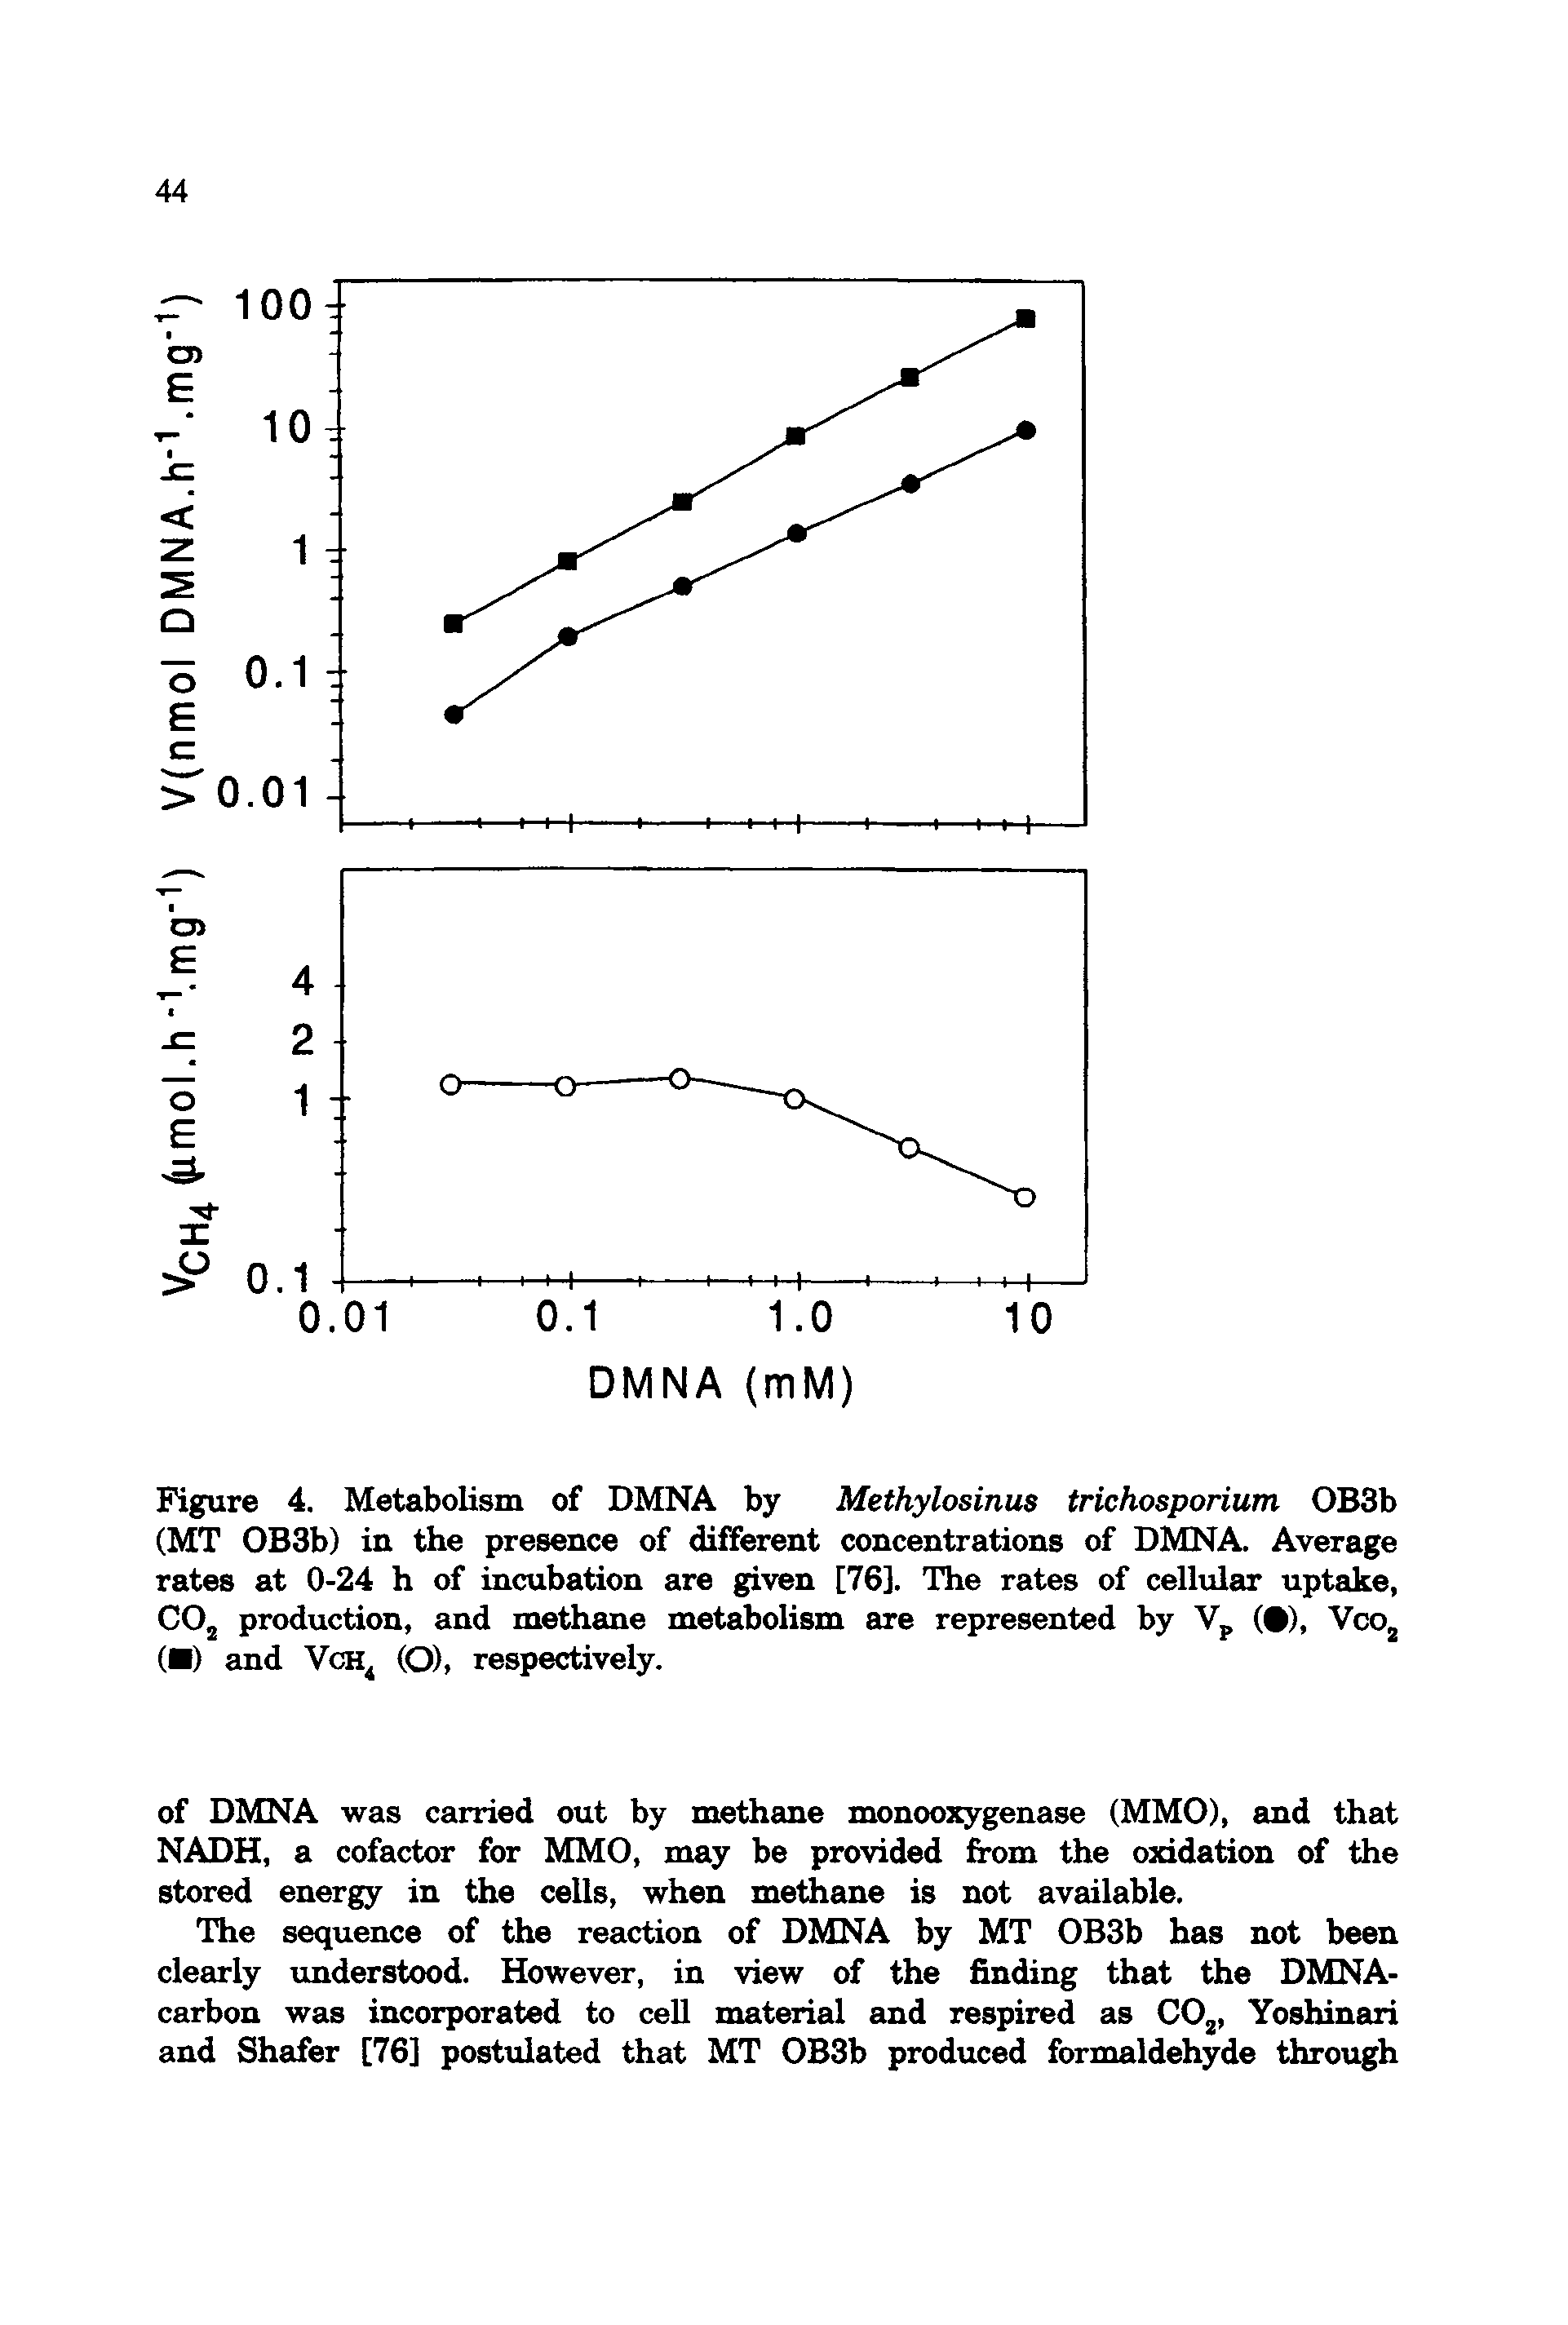 Figure 4. Metabolism of DMNA by Methylosinus trichosporium OB3b (MT OBSb) in the presence of different concentrations of DMNA. Average rates at 0-24 h of incubation are given [76]. The rates of cellular uptake, COj production, and methane metabolism are represented by Vp ( ), VcOj ( ) and VcH (O), respectively.